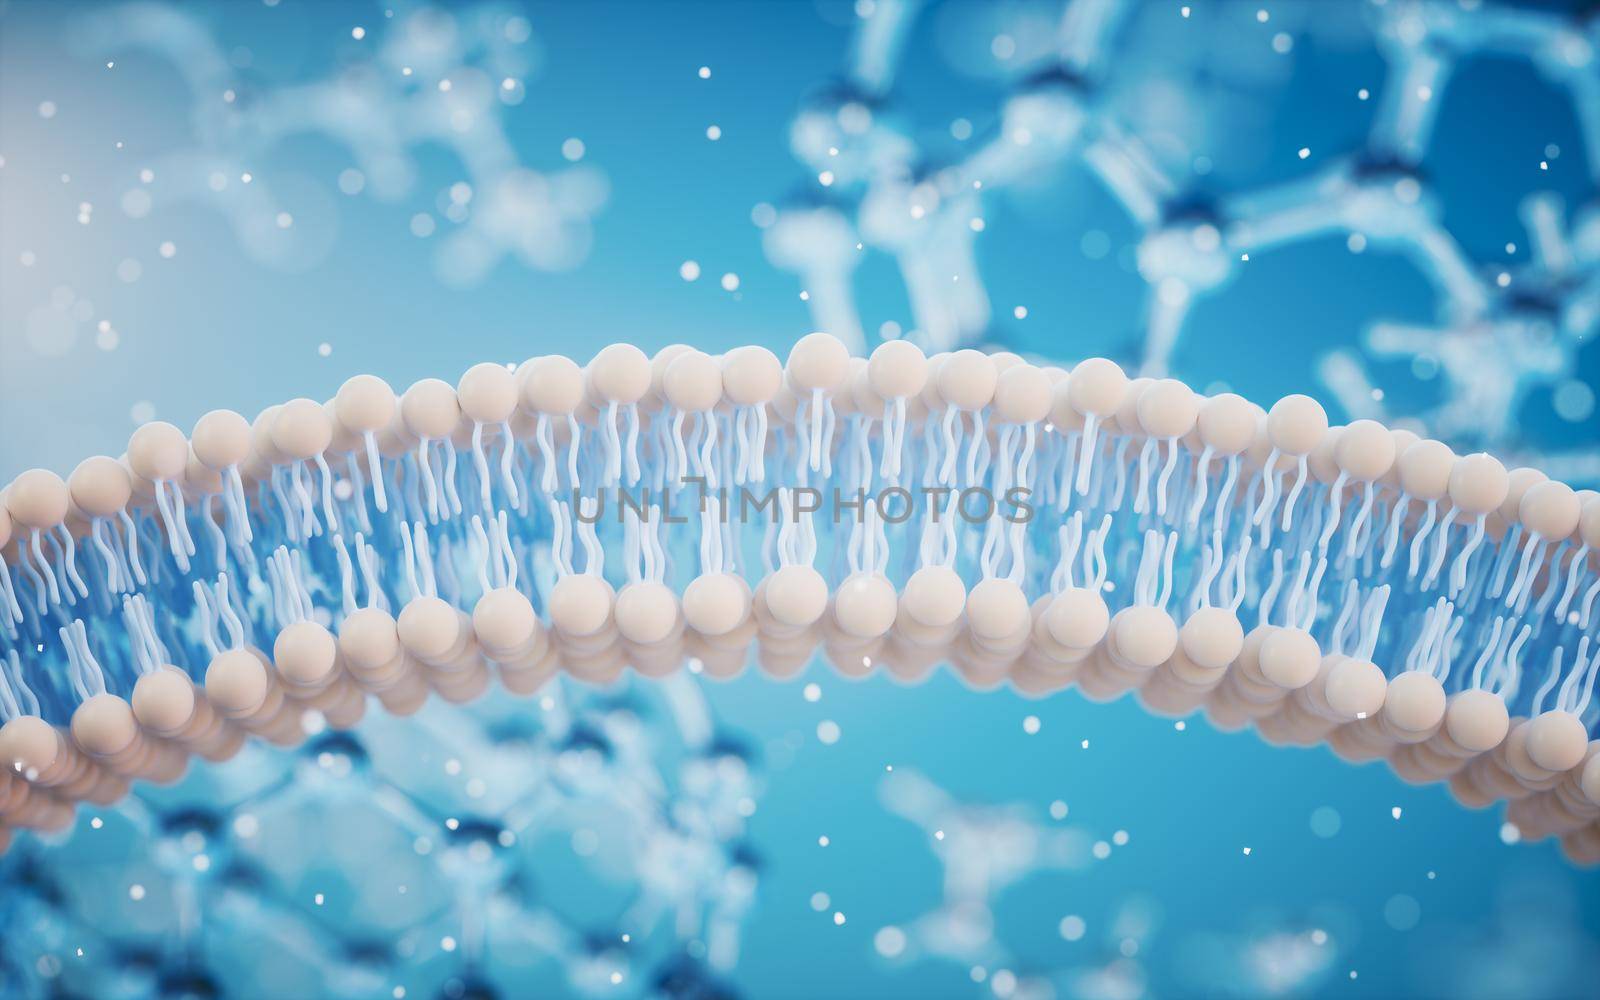 Cell membrane with blue background, 3d rendering. by vinkfan